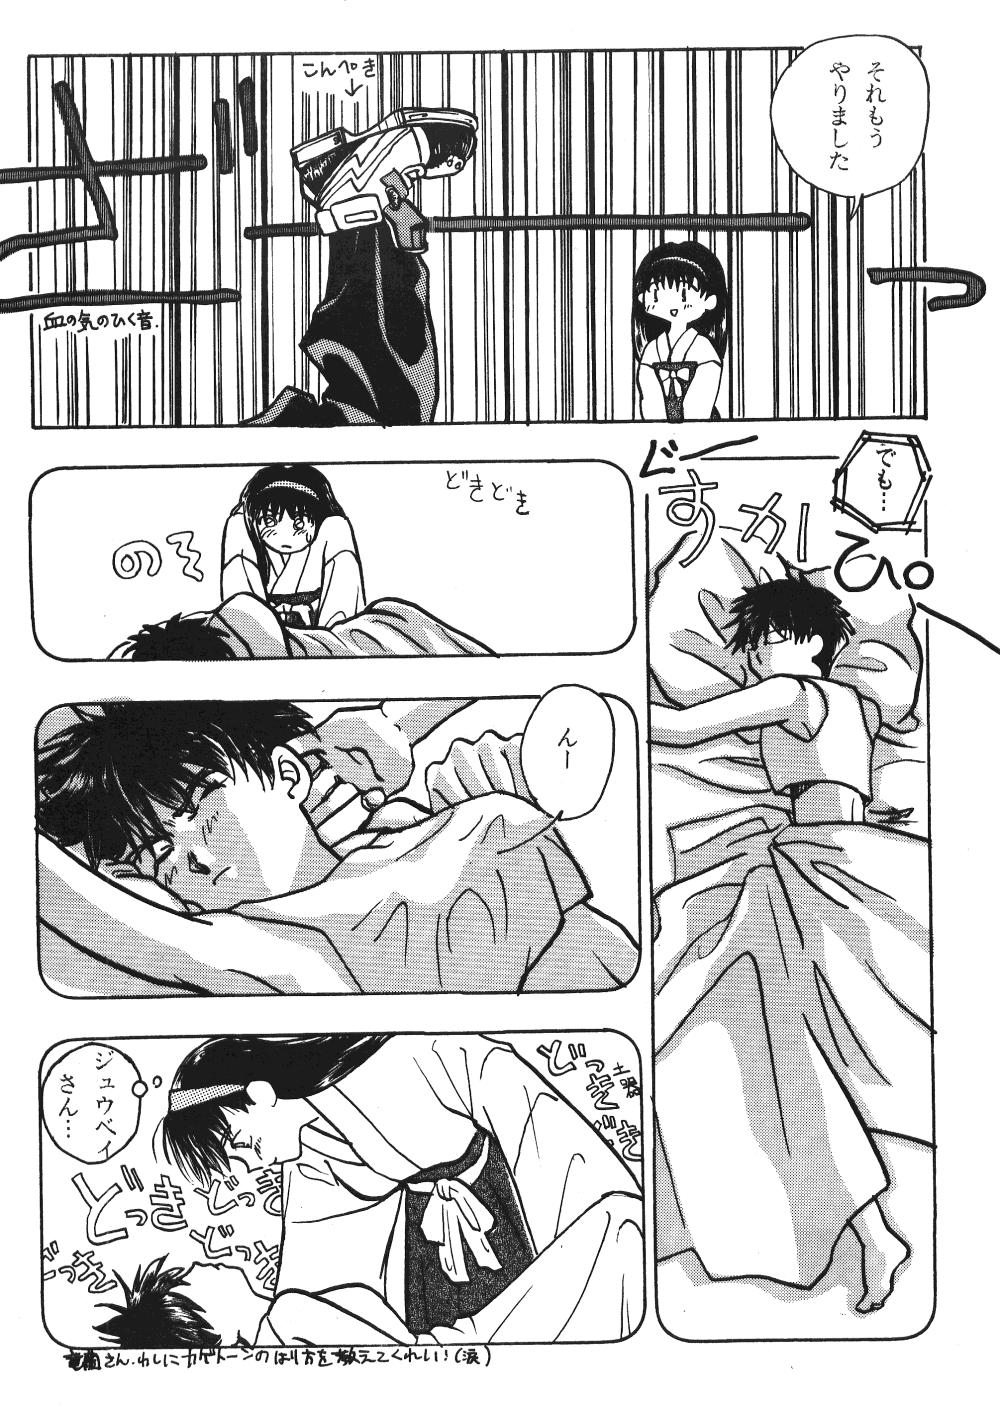 Girl Girl Seinen Sunday - Street fighter Ranma 12 Ghost sweeper mikami Bdsm - Page 11